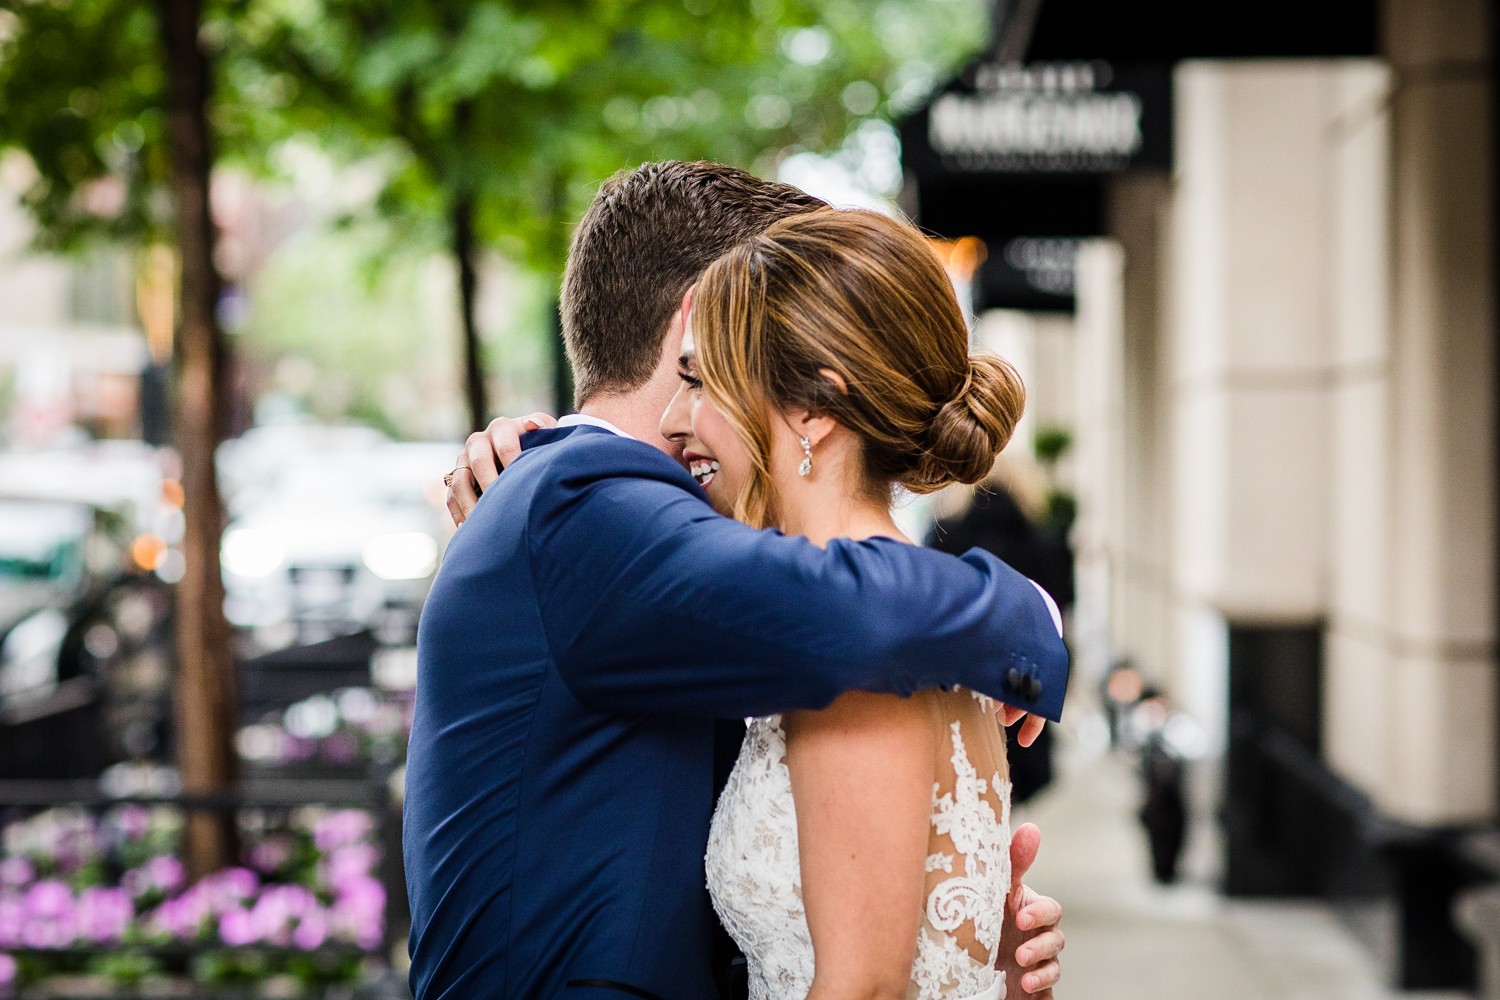 A bride and groom share their first look before a Gallery Marchetti wedding.